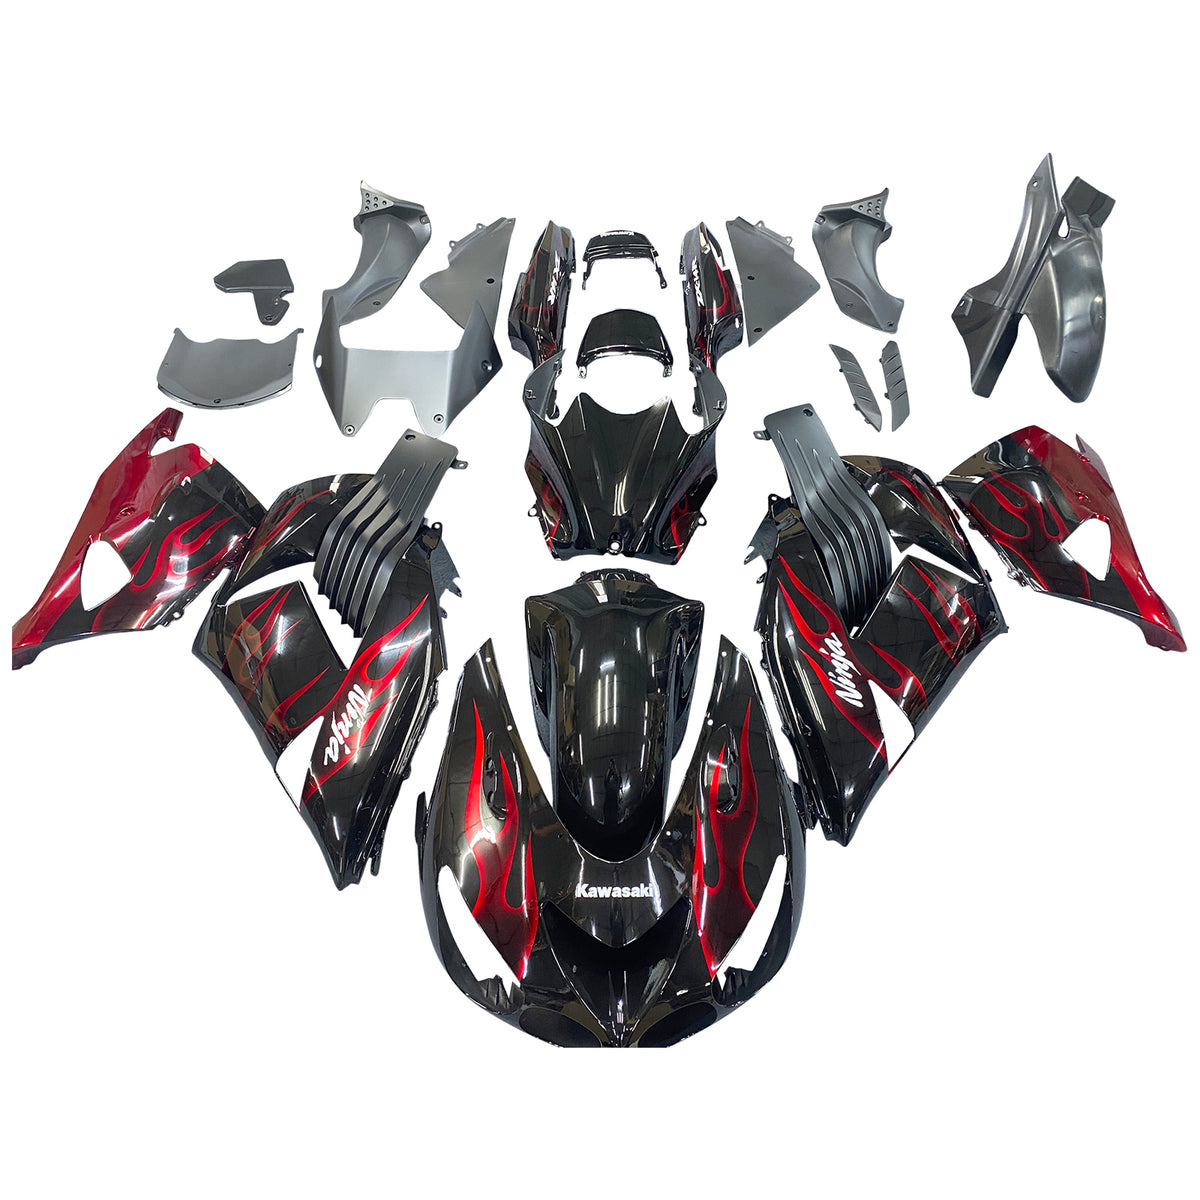 Amotopart 2006-2011 Kawasaki ZX14R Black with Red Flame Fairing Kit